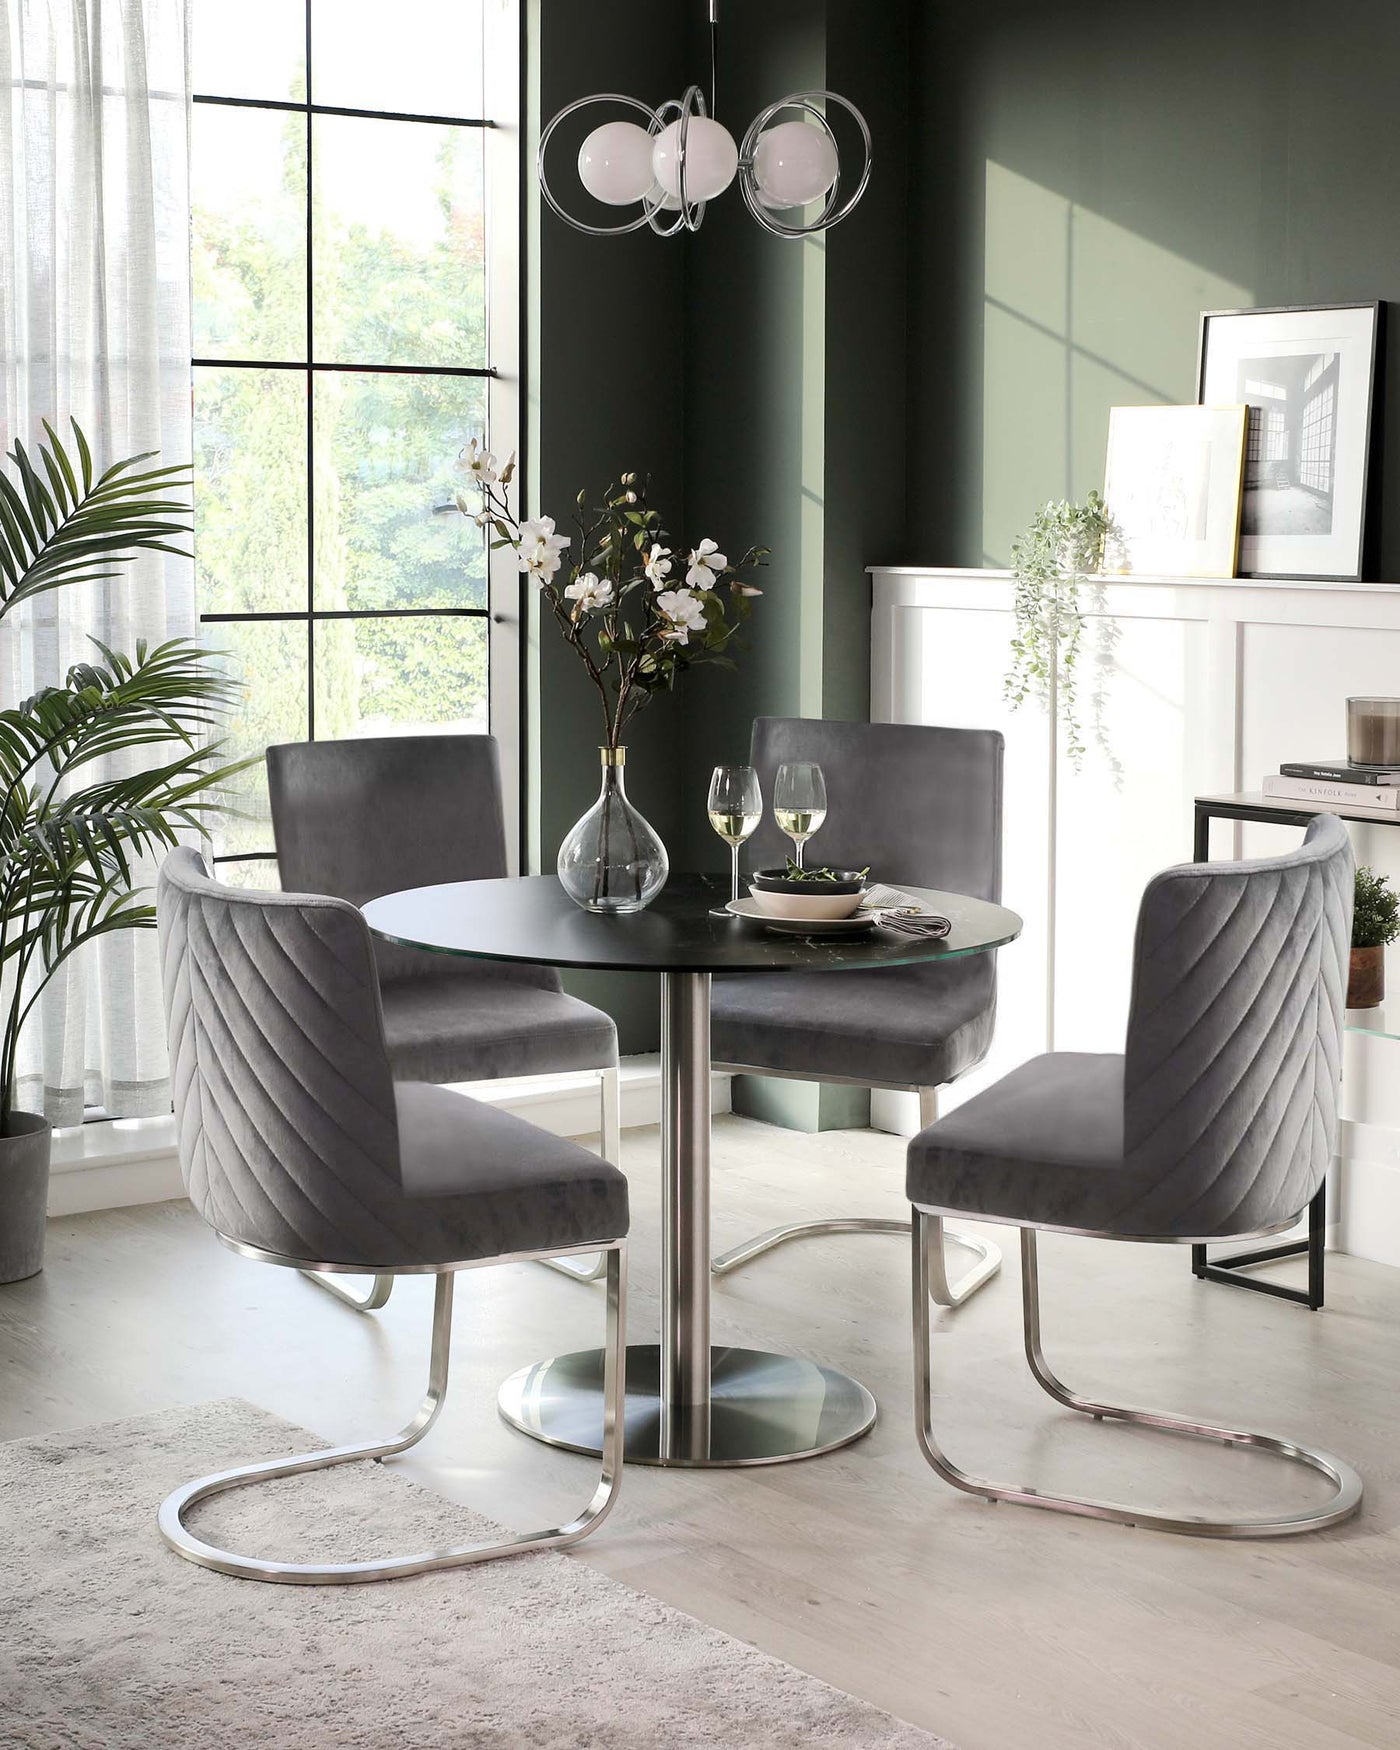 Elegant modern dining set featuring a round black table with a reflective cylindrical base and three grey velvet upholstered chairs with unique curved chrome legs. The set radiates sophistication and contemporary style, perfect for a chic dining room.